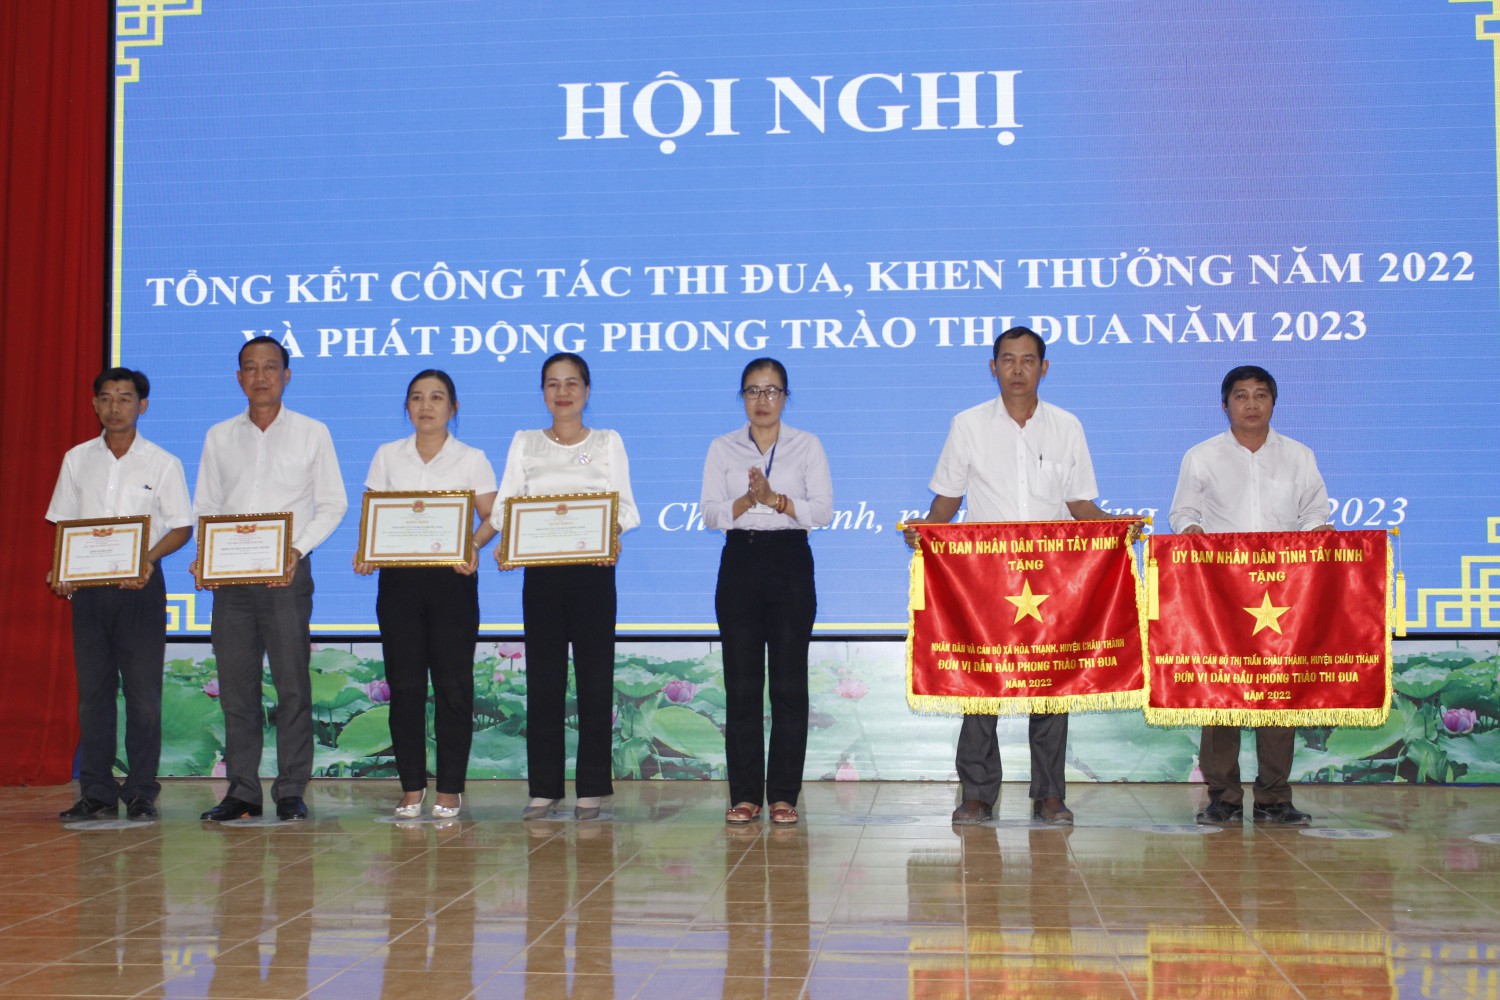 07 principles for considering emulation titles and commendation forms from 2024 in Vietnam